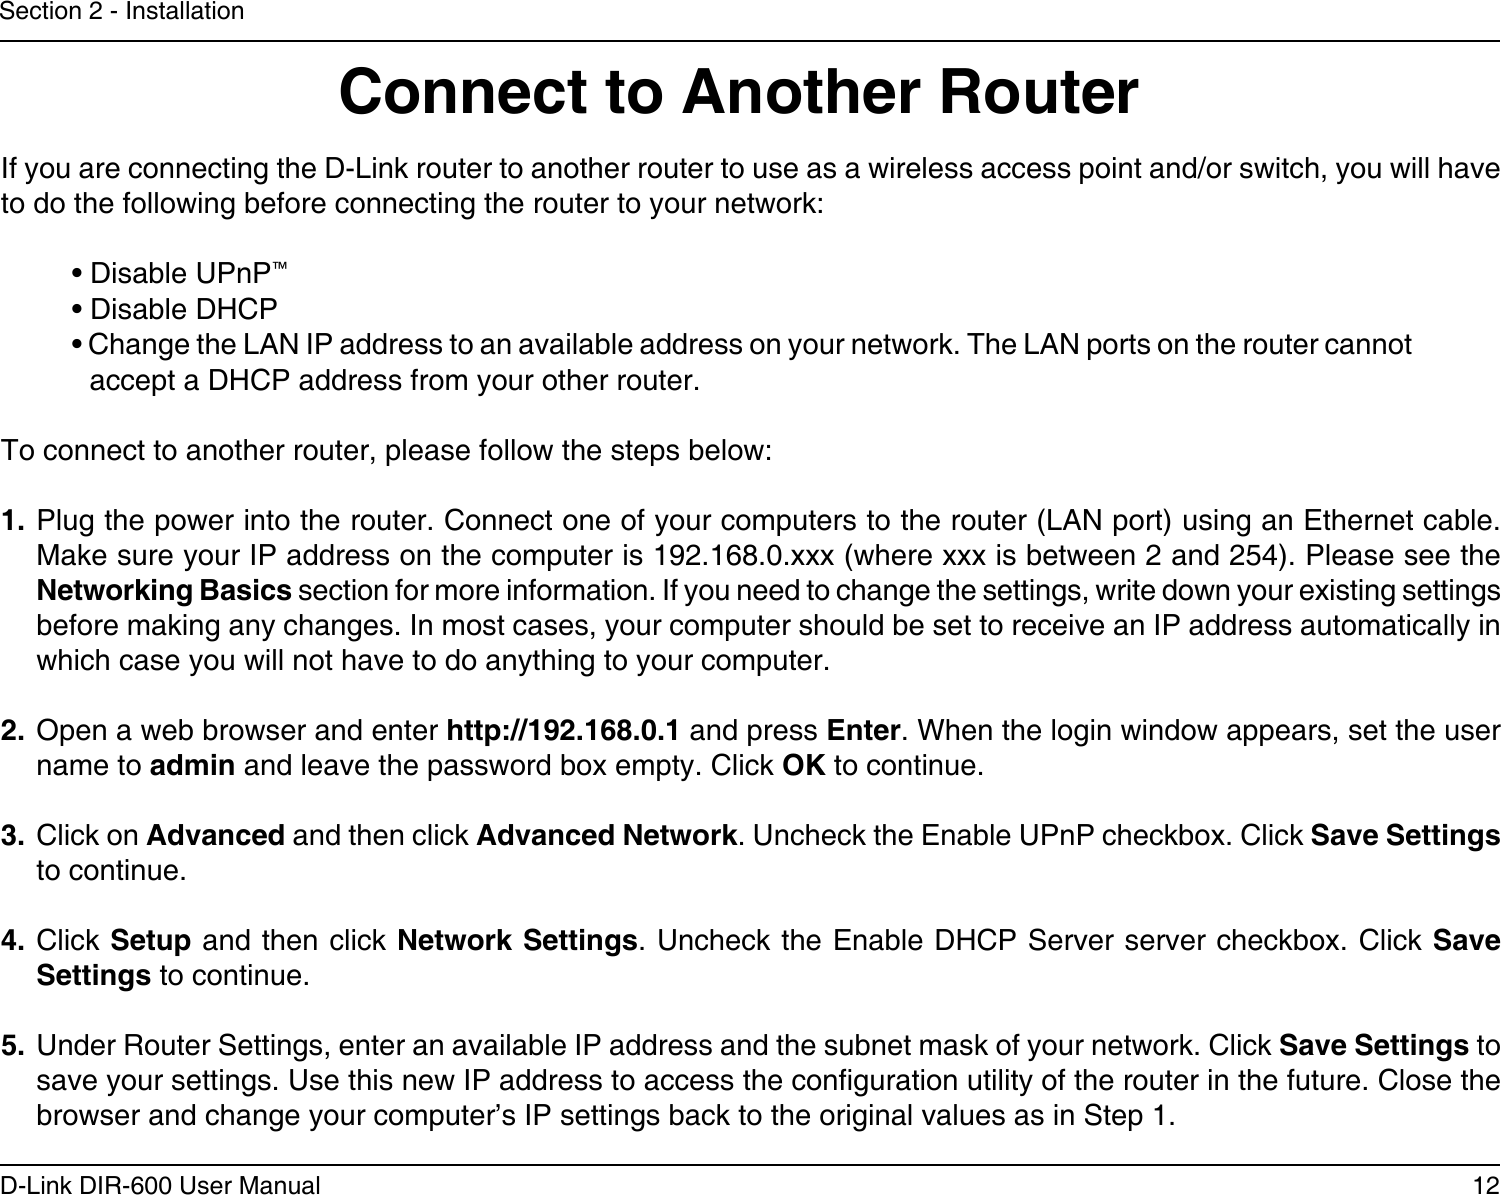 12D-Link DIR-600 User ManualSection 2 - InstallationIf you are connecting the D-Link router to another router to use as a wireless access point and/or switch, you will have to do the following before connecting the router to your network:• Disable UPnP™• Disable DHCP• Change the LAN IP address to an available address on your network. The LAN ports on the router cannot accept a DHCP address from your other router.To connect to another router, please follow the steps below:1. Plug the power into the router. Connect one of your computers to the router (LAN port) using an Ethernet cable. Make sure your IP address on the computer is 192.168.0.xxx (where xxx is between 2 and 254). Please see the Networking Basics section for more information. If you need to change the settings, write down your existing settings before making any changes. In most cases, your computer should be set to receive an IP address automatically in which case you will not have to do anything to your computer.2. Open a web browser and enter http://192.168.0.1 and press Enter. When the login window appears, set the user name to admin and leave the password box empty. Click OK to continue.3. Click on Advanced and then click Advanced Network. Uncheck the Enable UPnP checkbox. Click Save Settings to continue. 4. Click Setup and then click Network Settings. Uncheck the Enable DHCP Server server checkbox. Click Save Settings to continue.5. Under Router Settings, enter an available IP address and the subnet mask of your network. Click Save Settings to save your settings. Use this new IP address to access the conguration utility of the router in the future. Close the browser and change your computer’s IP settings back to the original values as in Step 1.Connect to Another Router